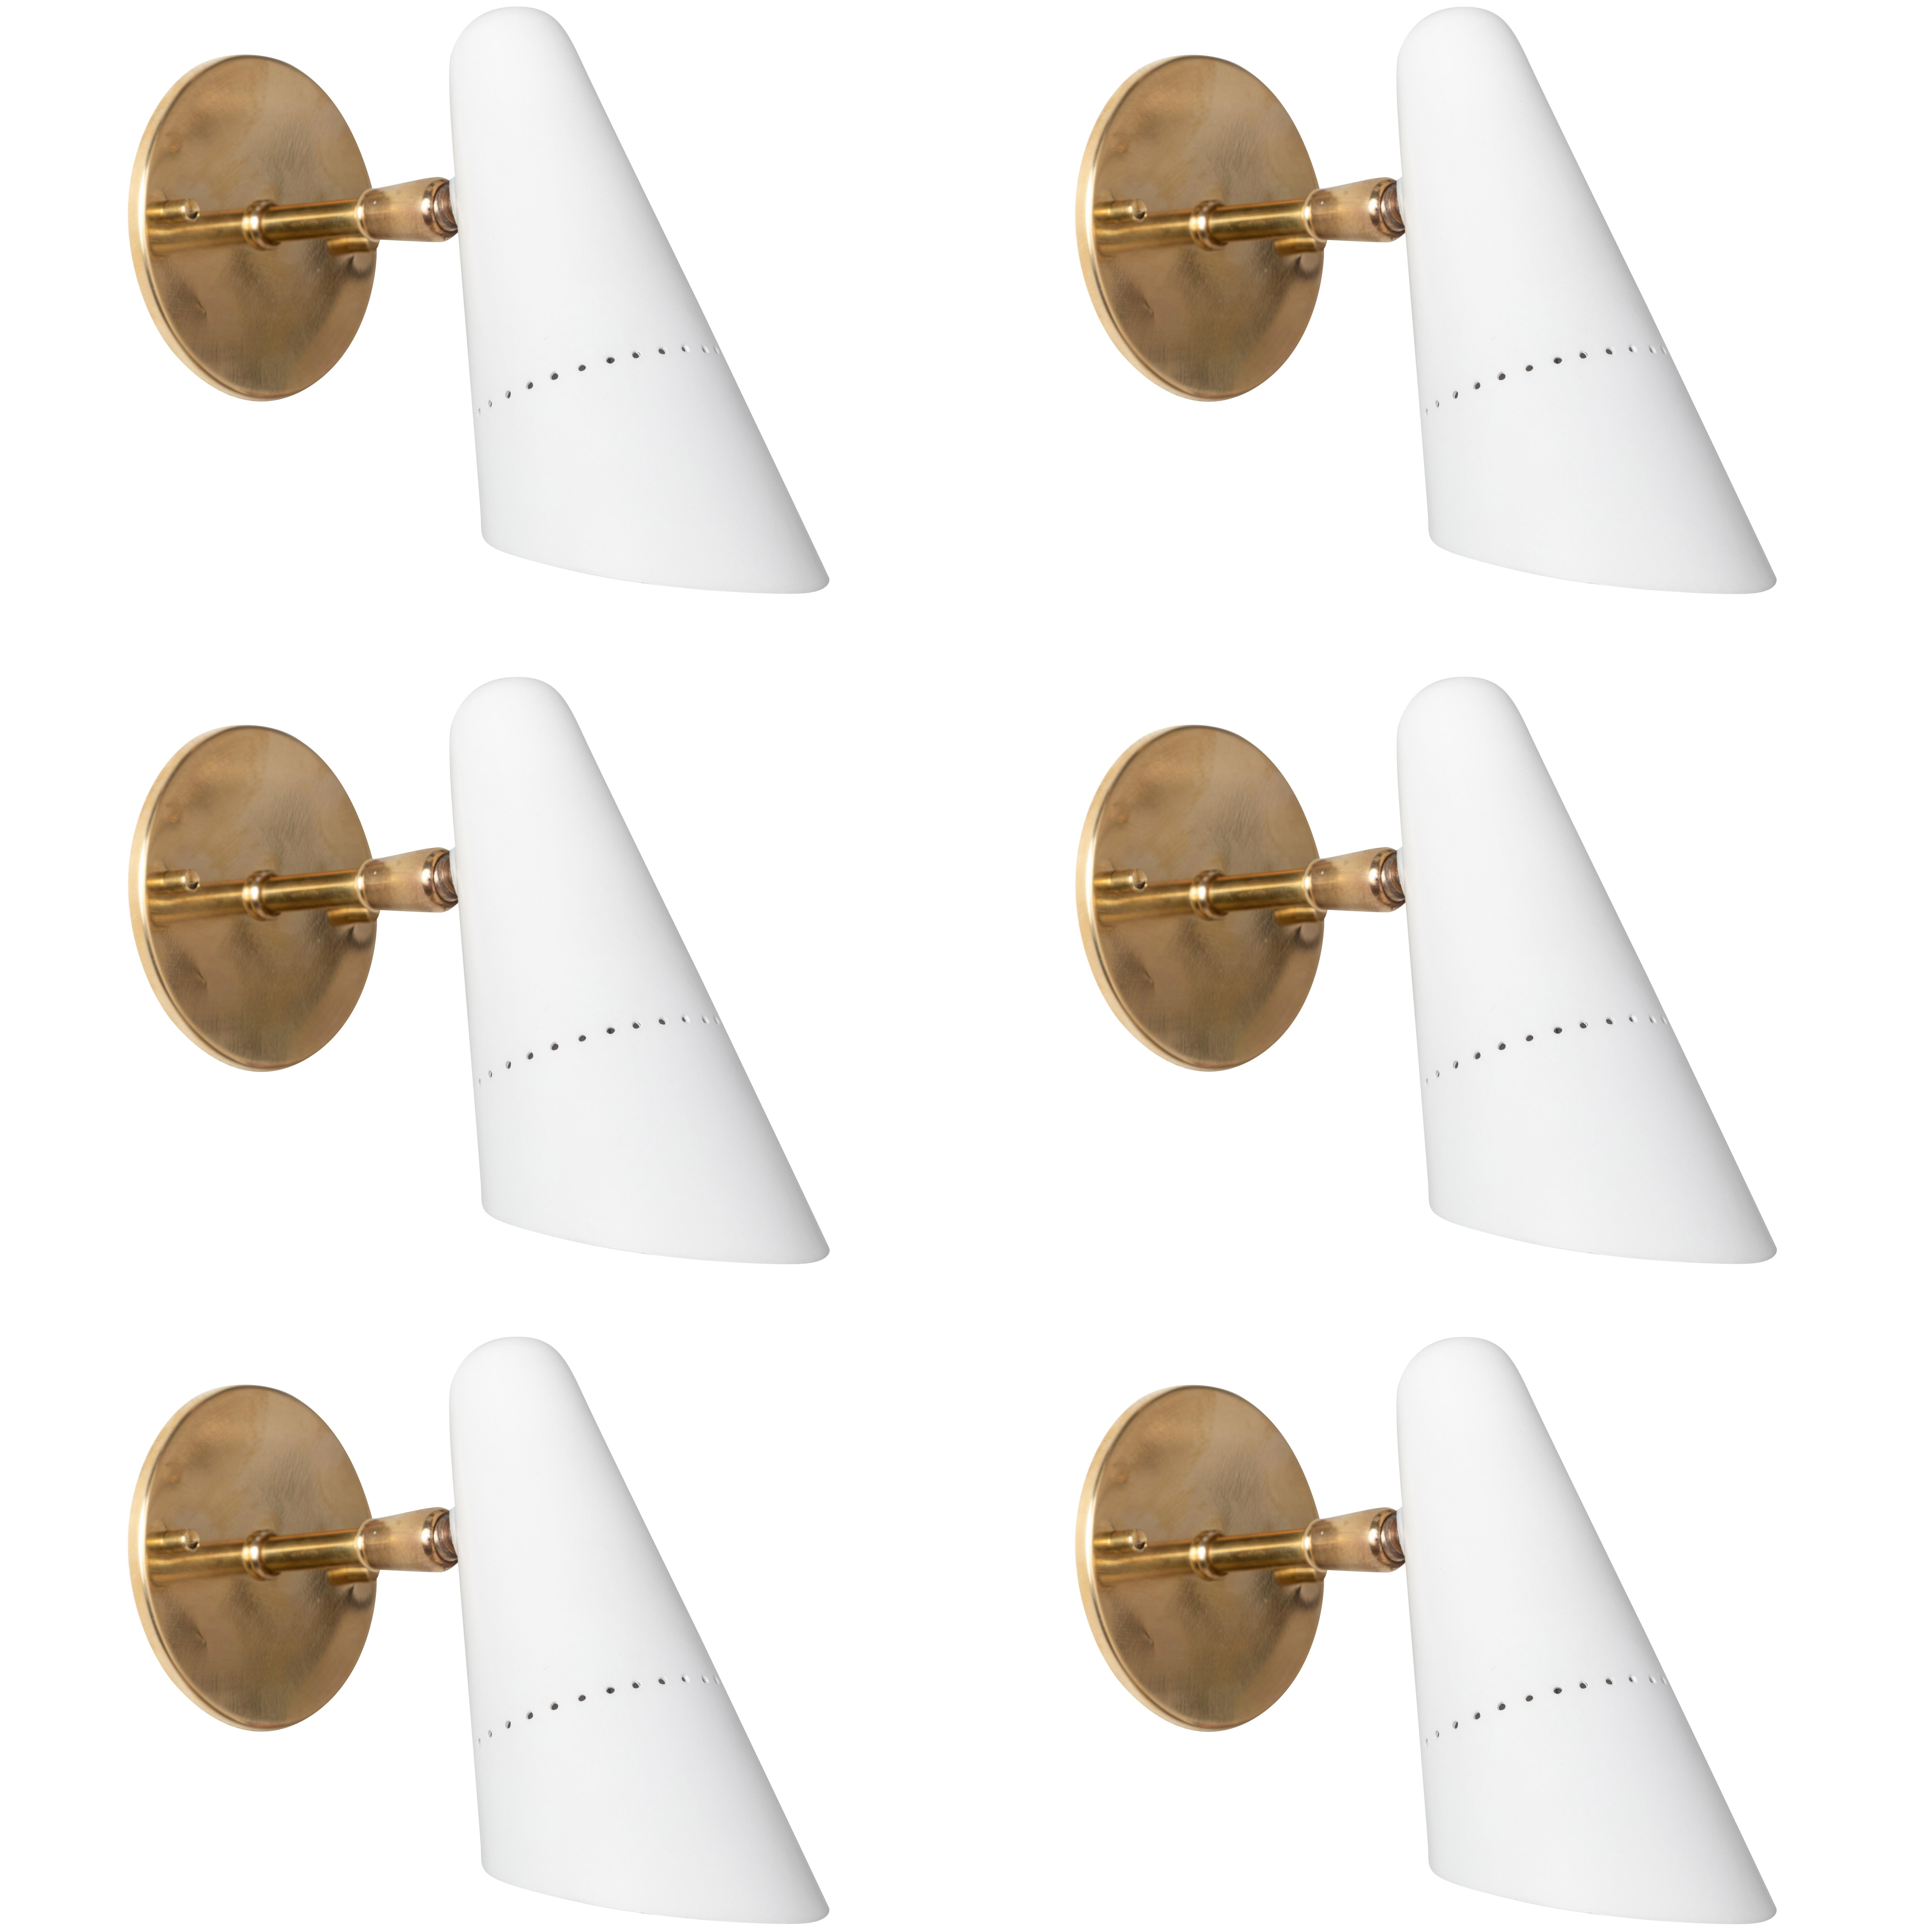 Pair of 1950s Italian white articulating sconces attributed to Gino Sarfatti. Executed in brass and white painted aluminum. Sconces pivot up/down and left/right on a ball joint. Custom brass backplates with brass hardware for hardwiring mounting